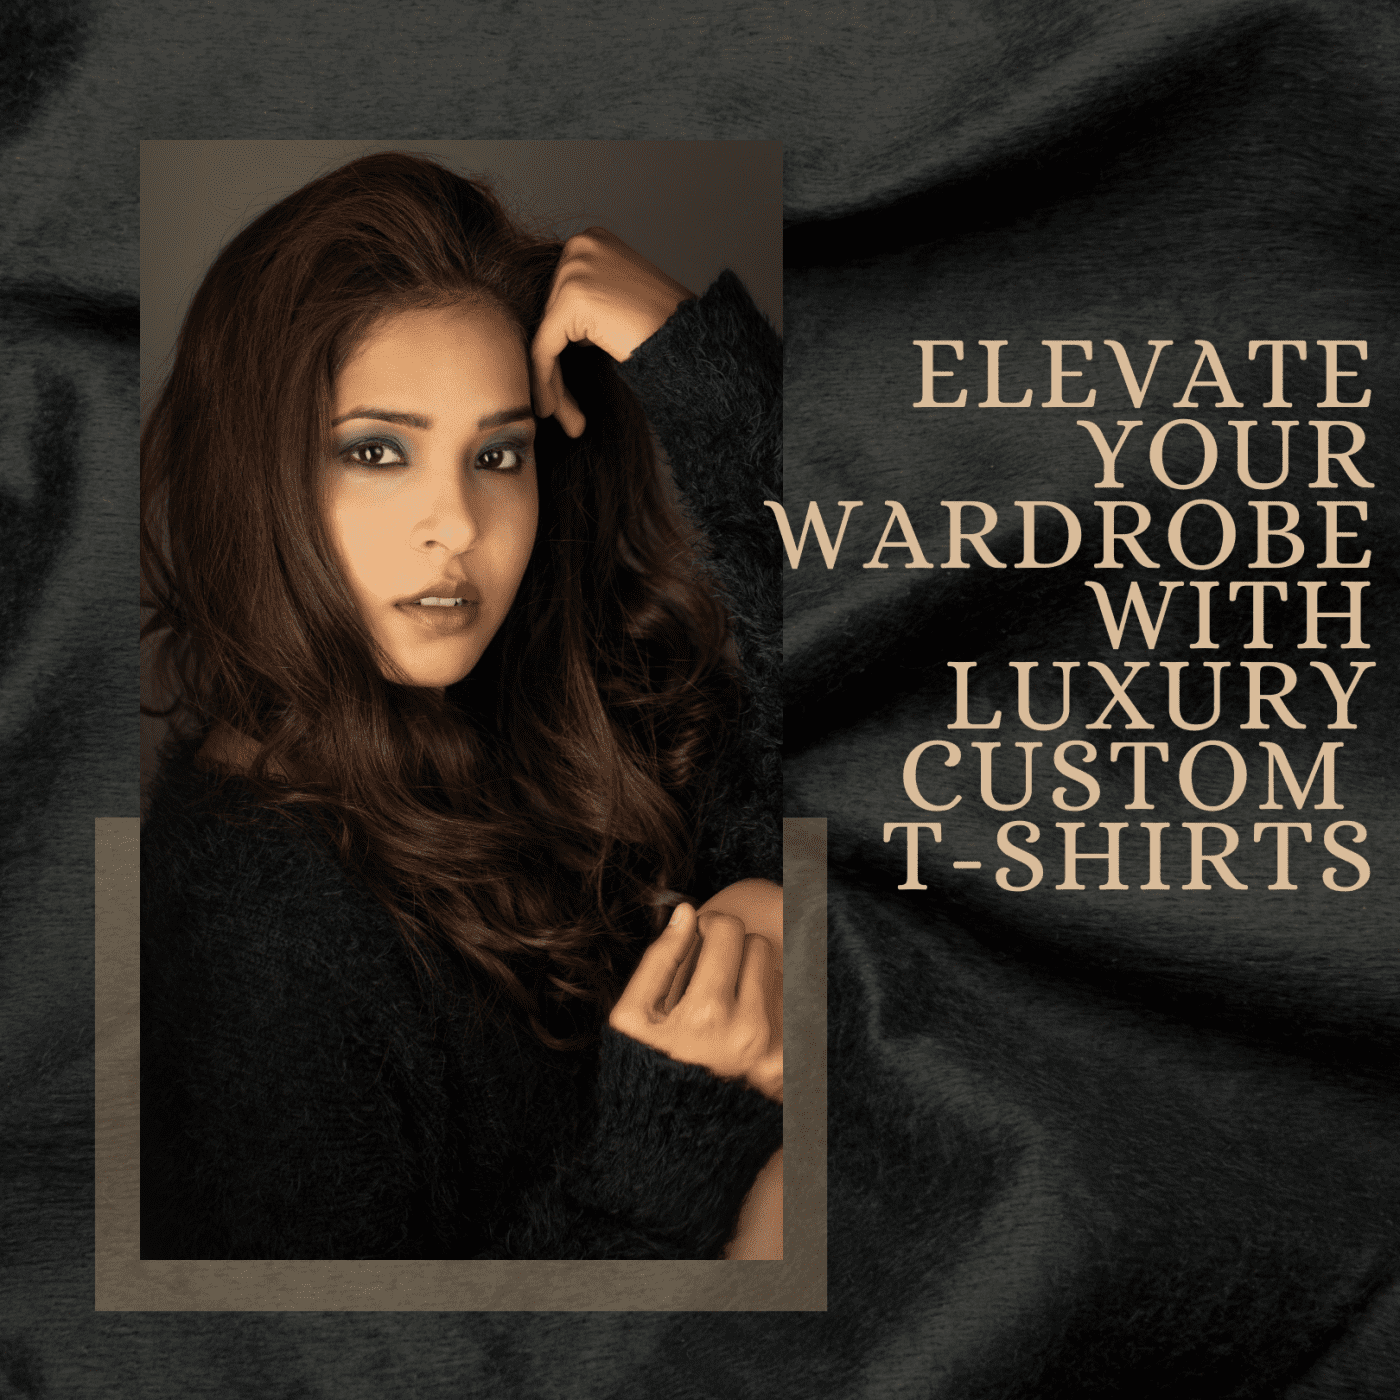 Elevate Your Wardrobe with Luxury Custom T-Shirts, custom t shirts, custom t-shirts, t-shirt printing, t shirt printing